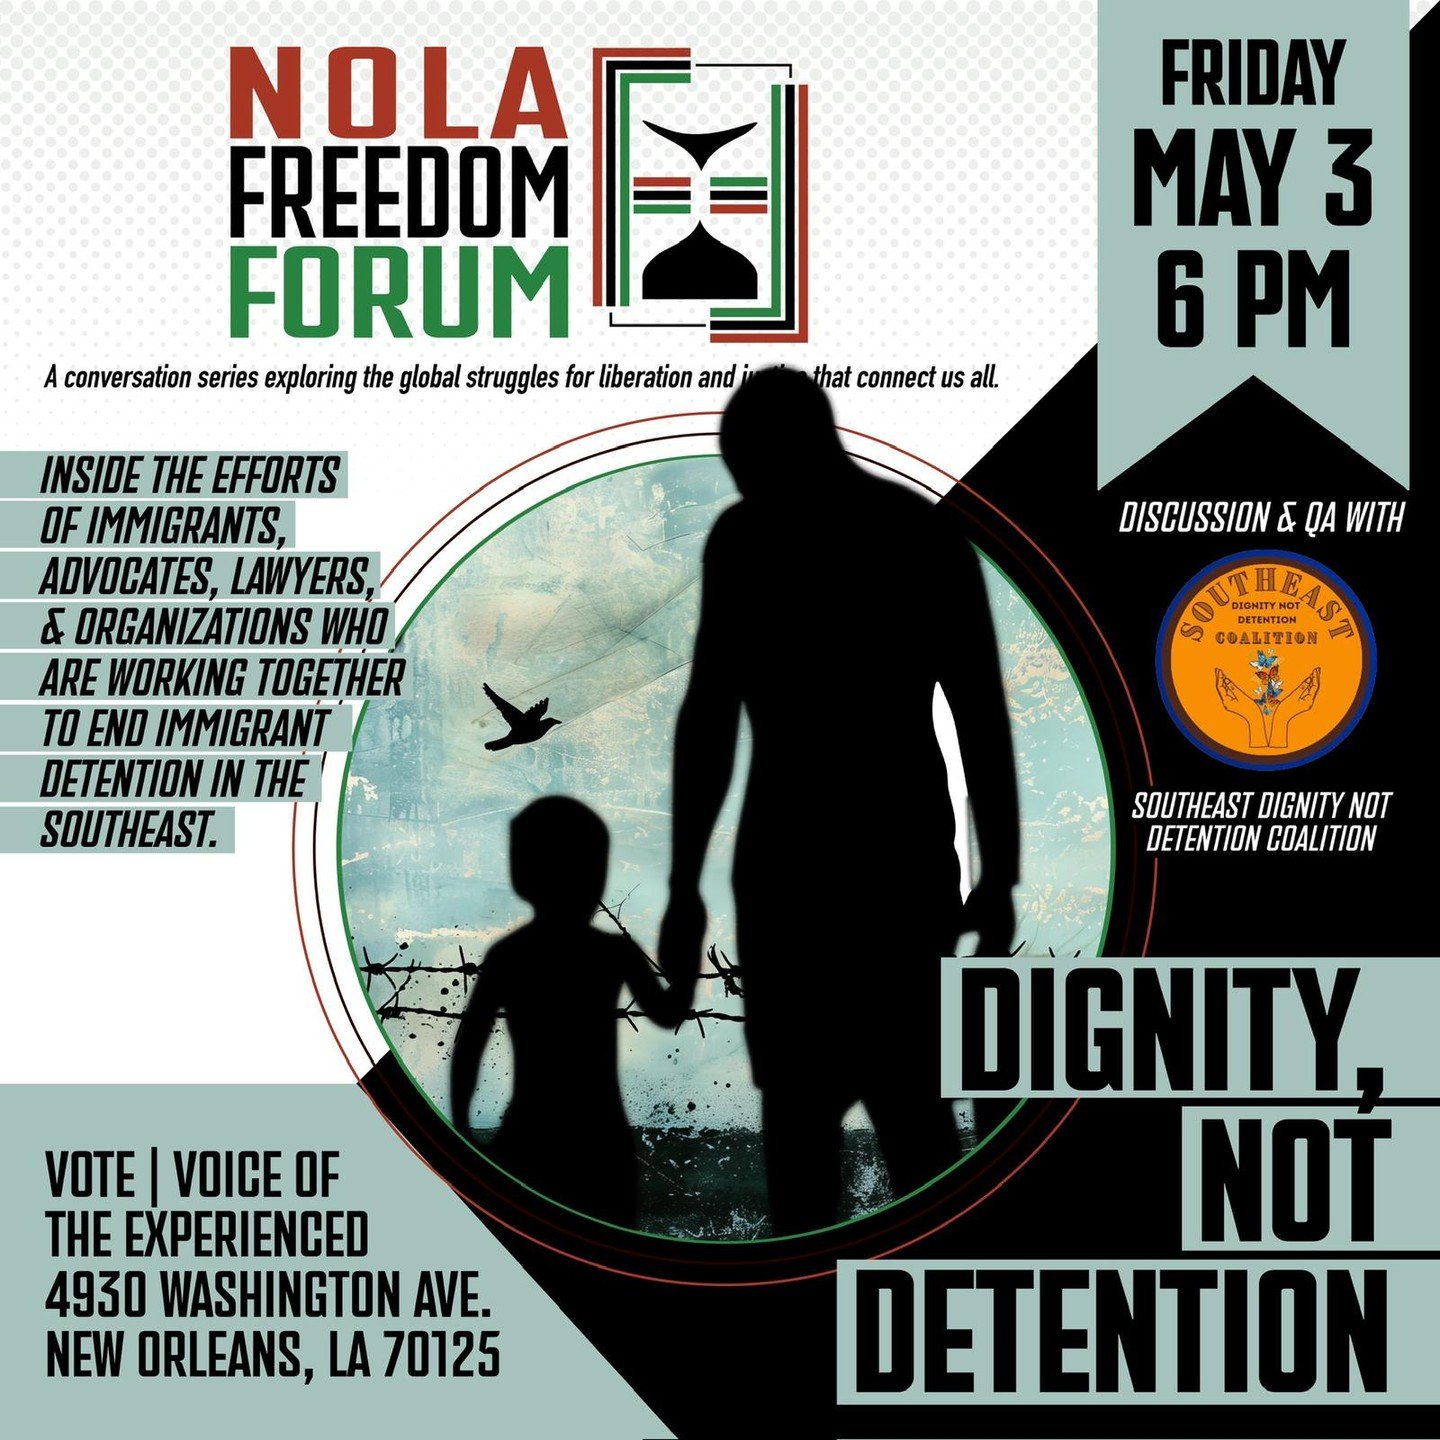 This Friday, join @nolafreedomforum for a conversation about immigration detention in the Southeast US and Louisiana--and efforts to end it-- with the Southeast Dignity Not Detention Coalition. 

Learn about the history and current state of the immig